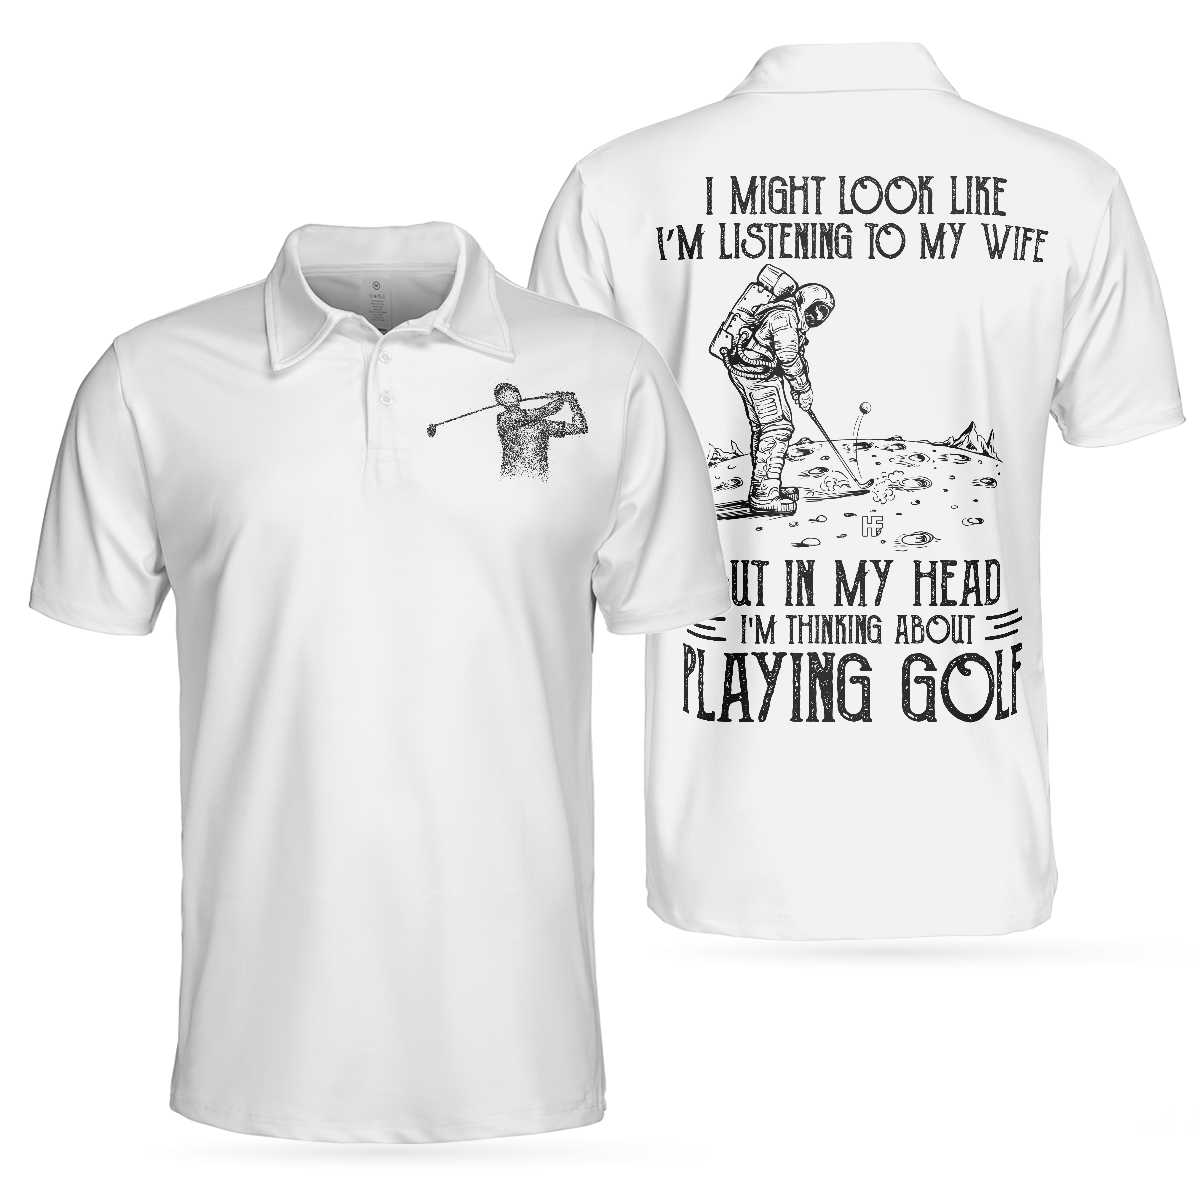 Playing Golf In My Head While Listening To My Wife Polo Shirt For Men Black And White Astronaut Golfer Polo Shirt - 1